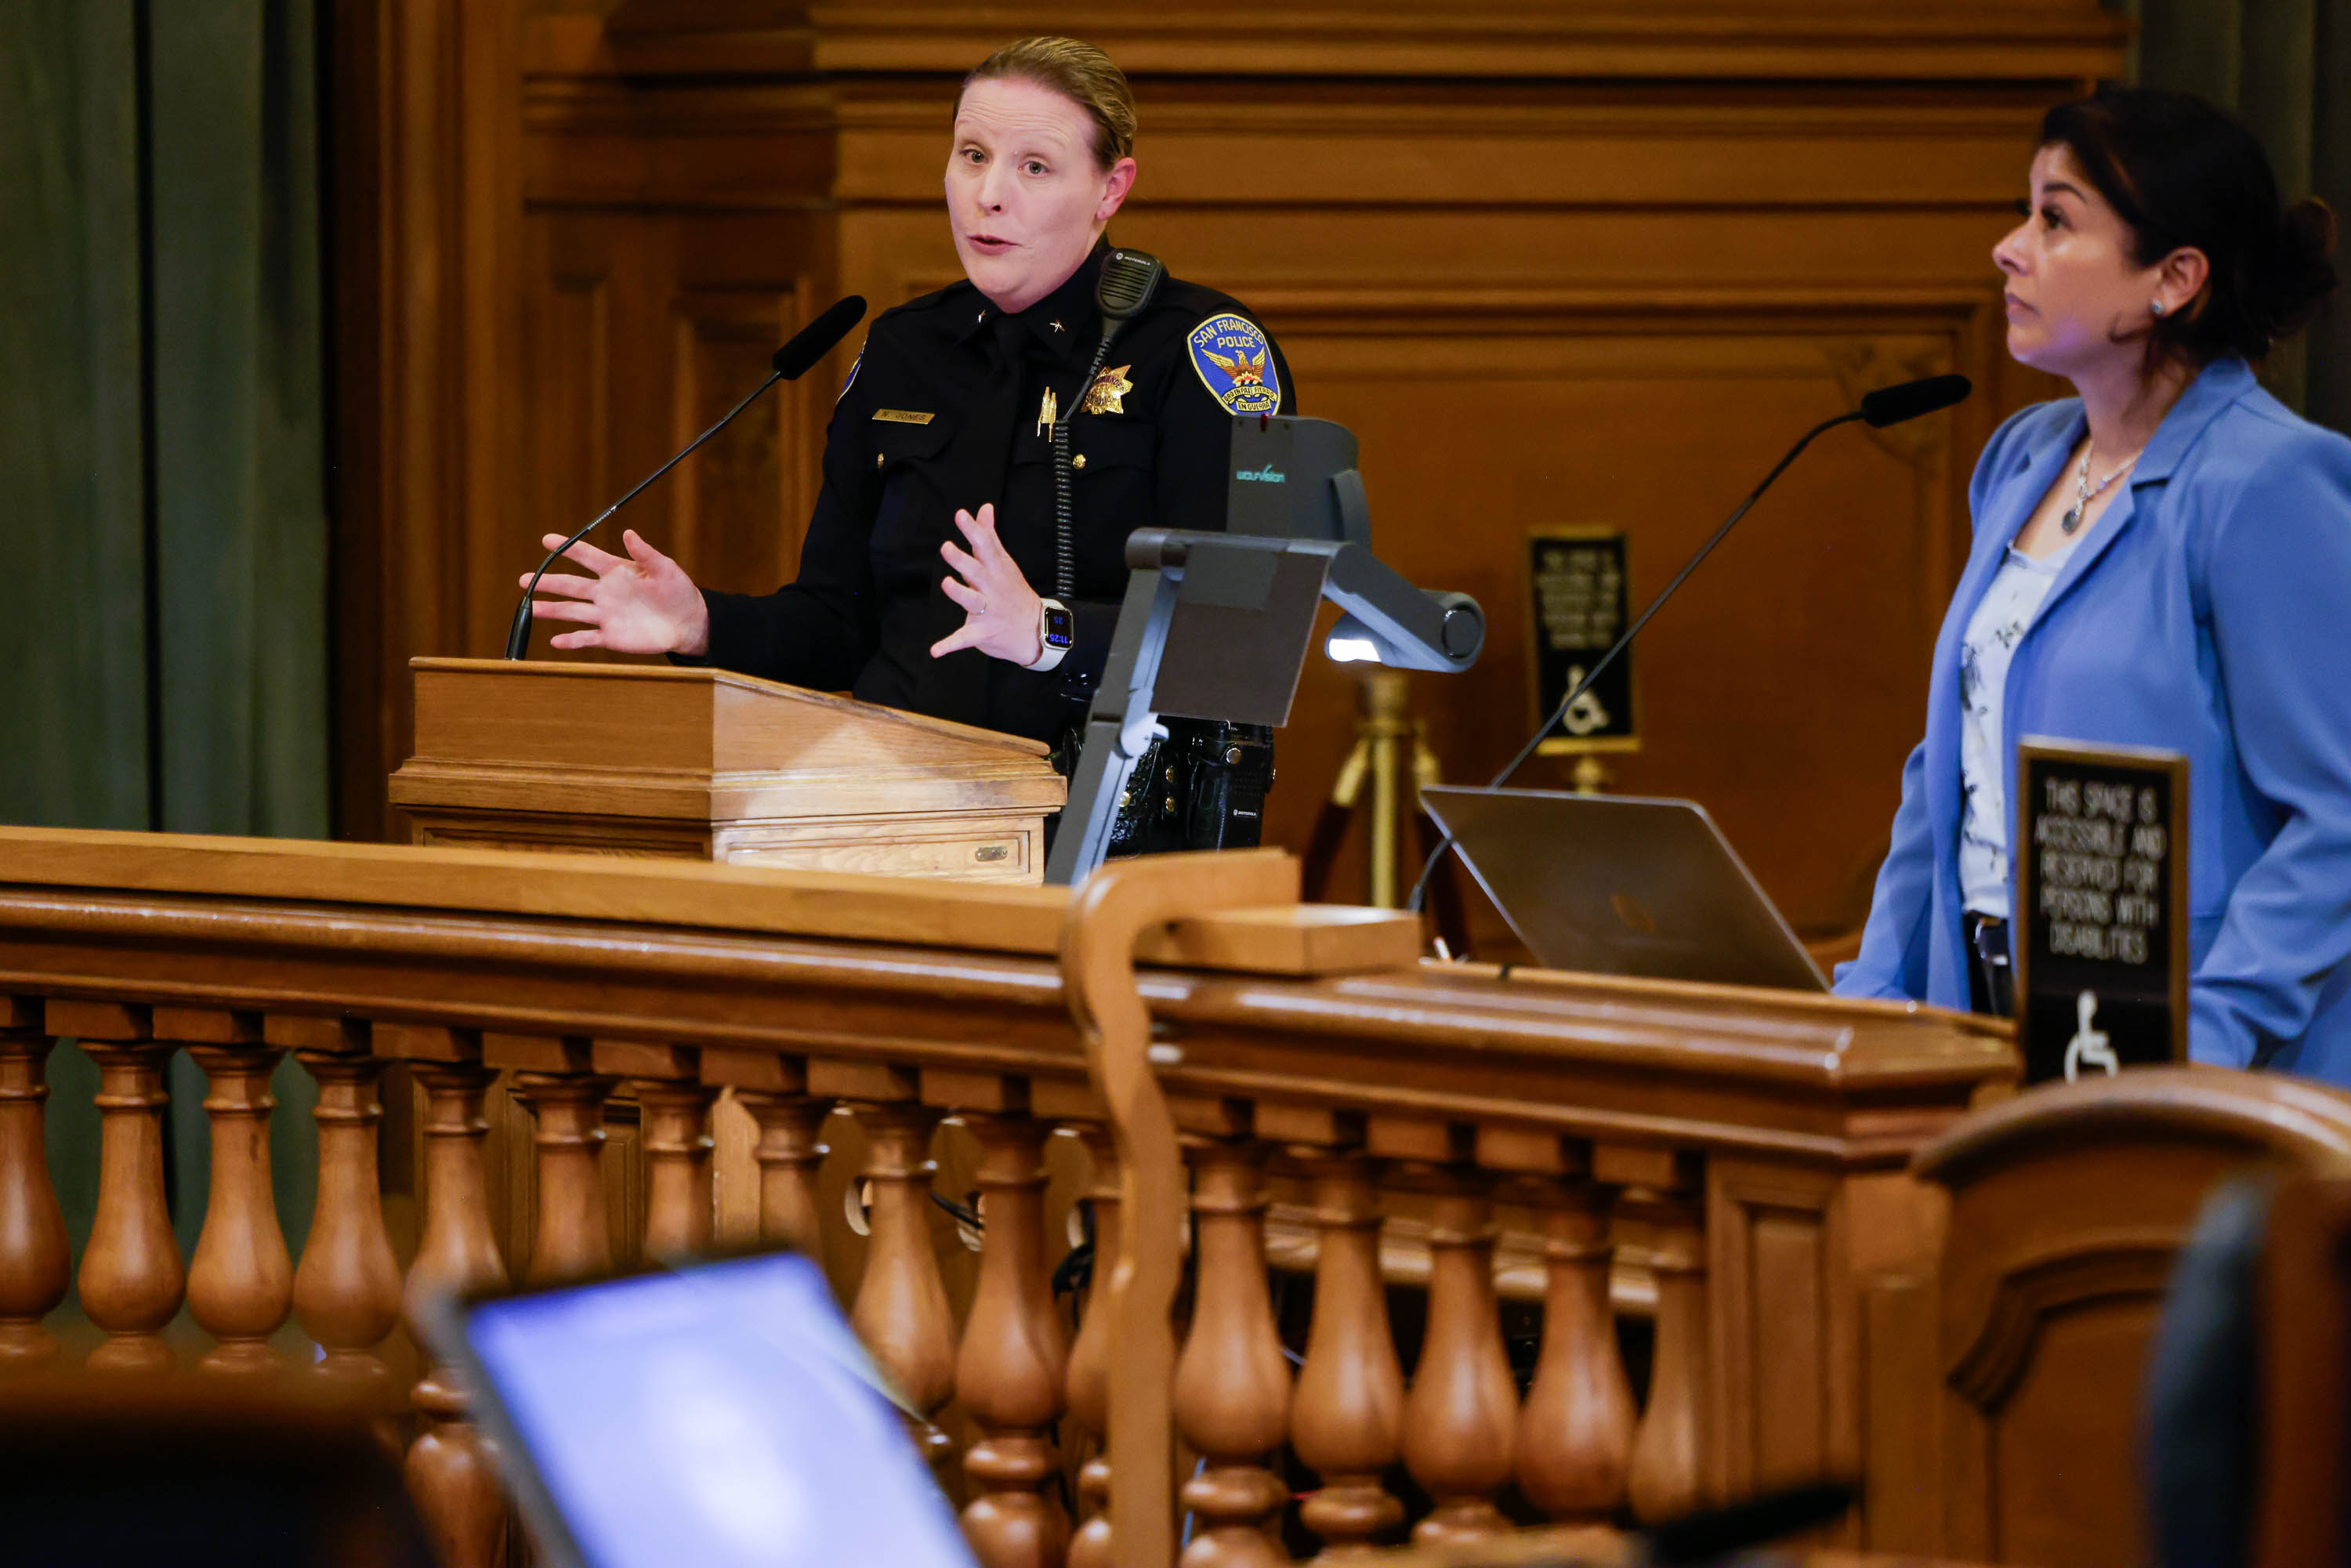 A uniformed police officer speaks at a podium while another person listens nearby in a wood-paneled room.